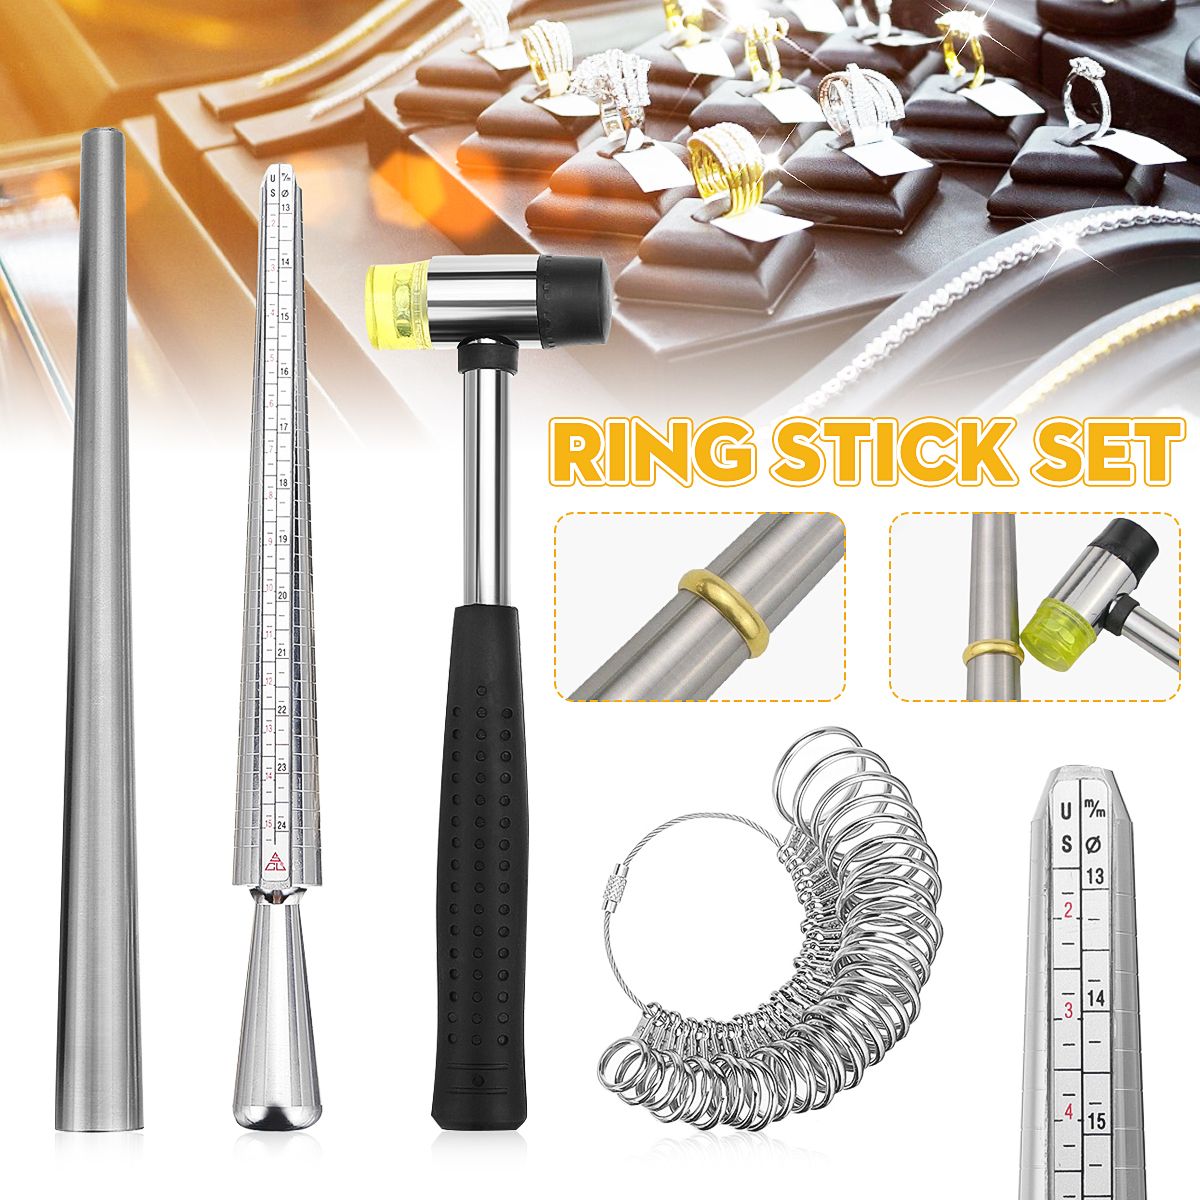 Jewelry-Measuring-Tool-Set-Alloy-Ring-Size-Stick-US-Code-Ring-Ruler-Hammer-Kit-1718557